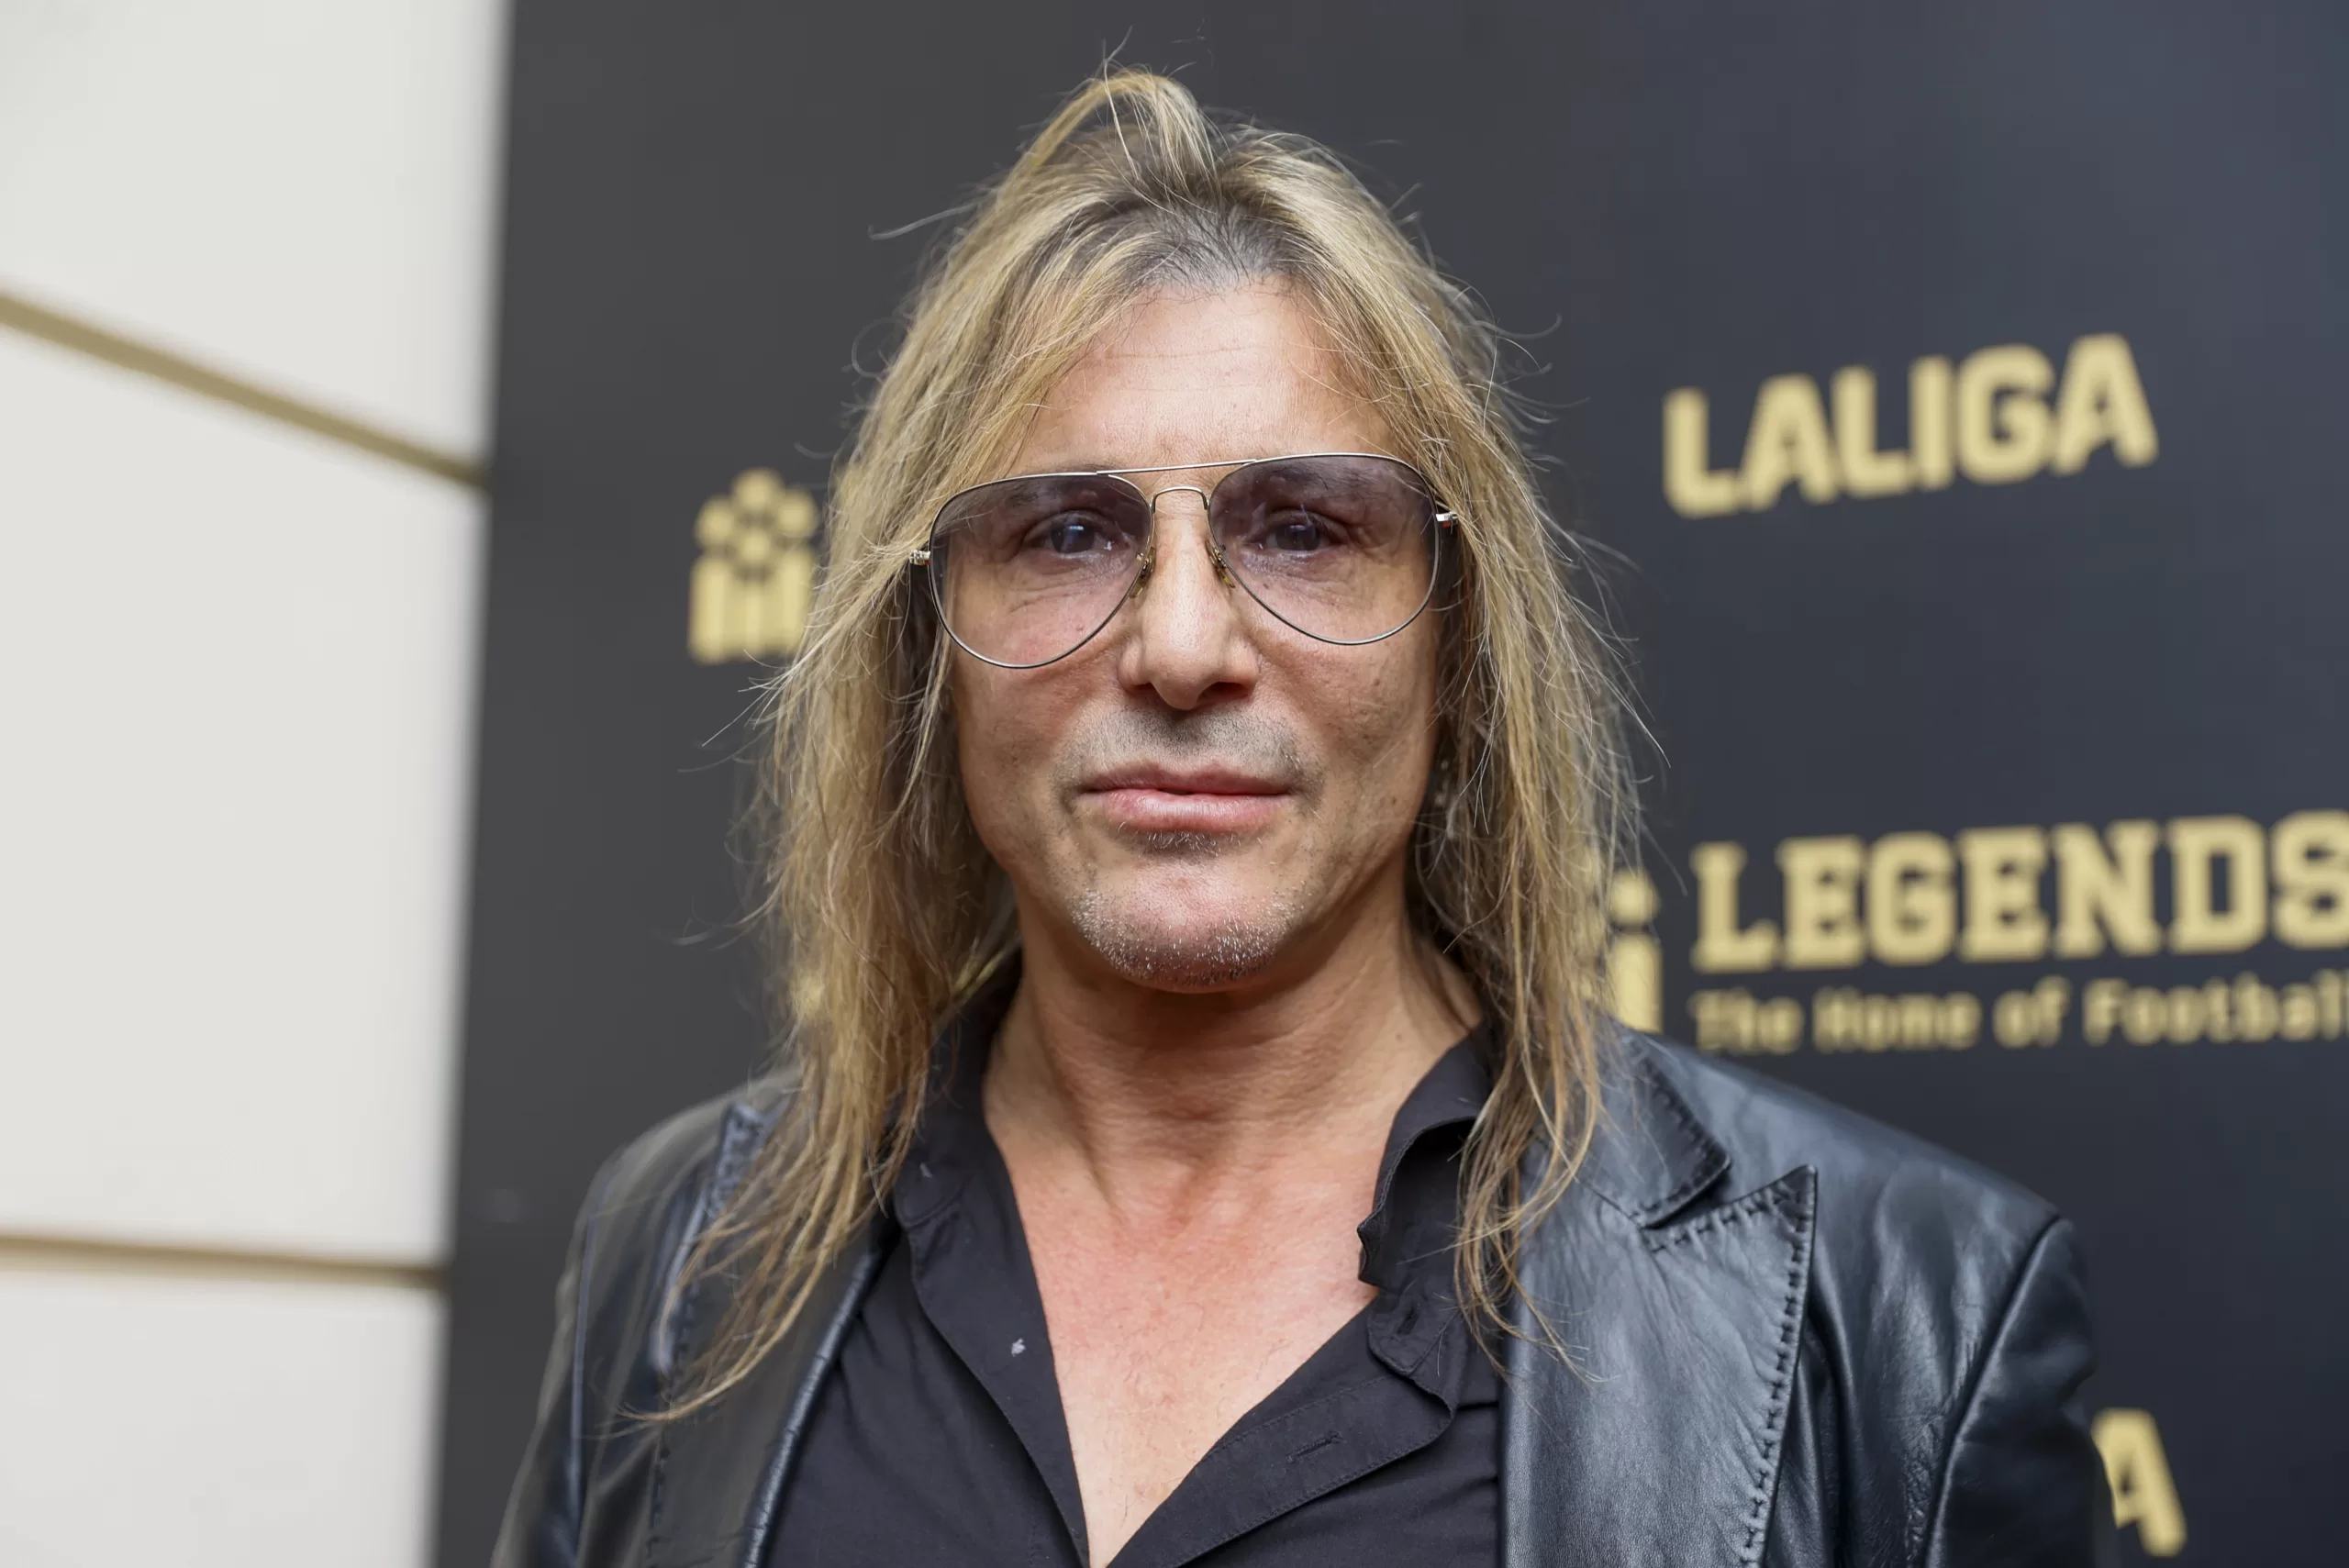 You are currently viewing Claudio Caniggia could face 15 years in prison for alleged sexual abuse